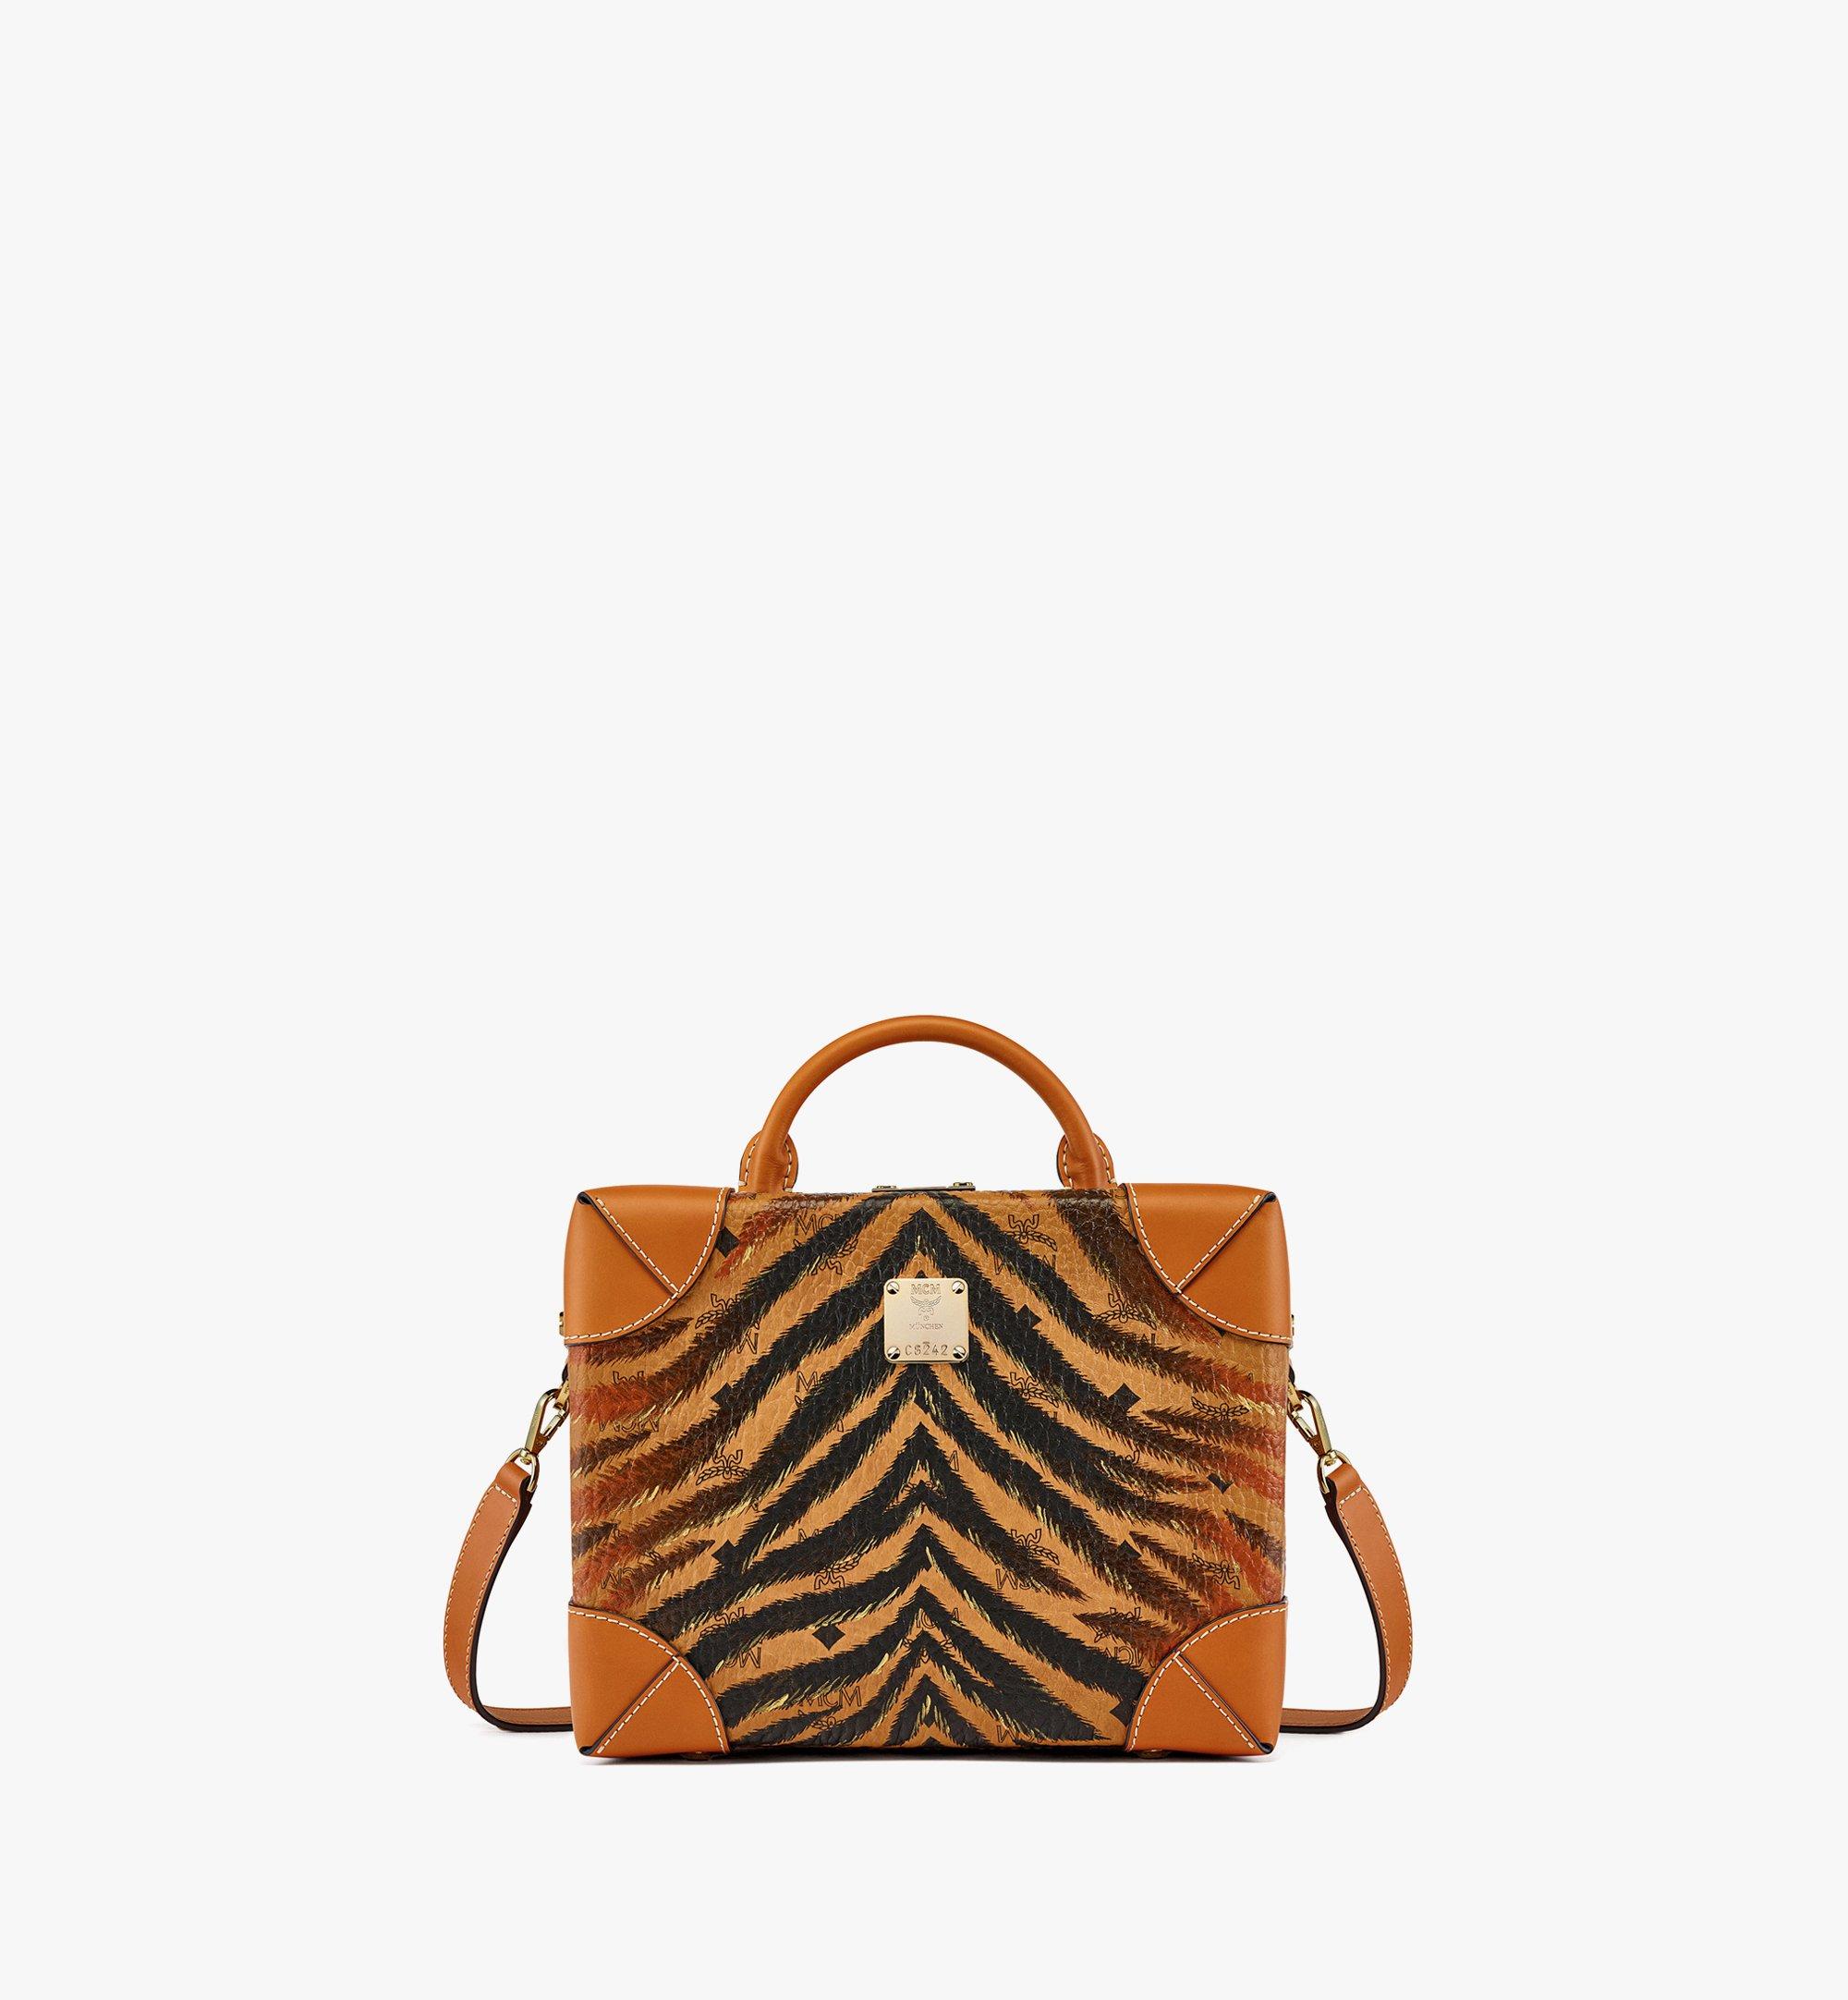 MCM Upcycling Project Berlin Crossbody in Tiger Marquage Visetos Cognac MWRCSUP01CO001 Alternate View 1